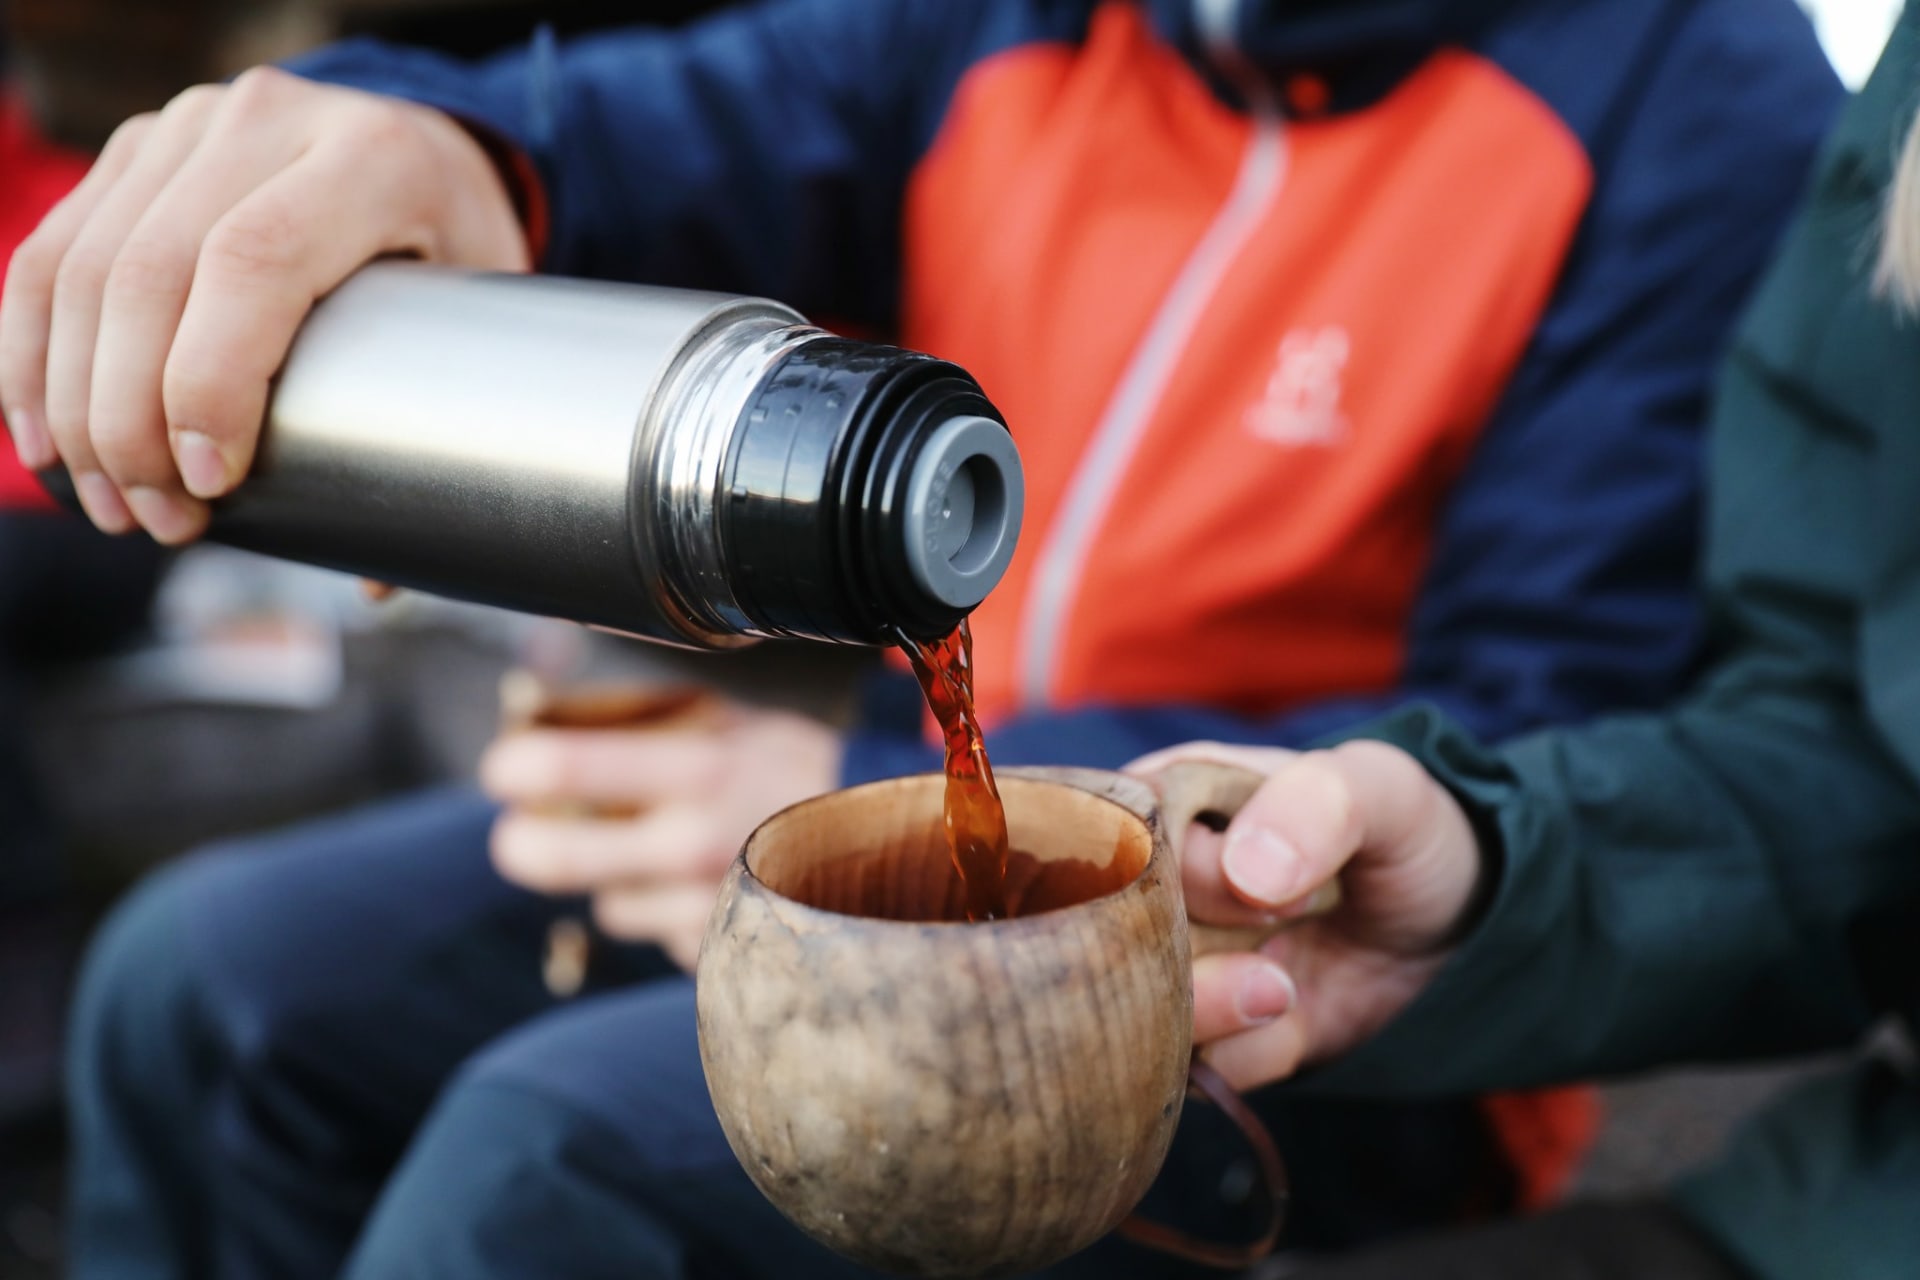 Coffee in nature. Coffee pouring from a thermos into a cup.